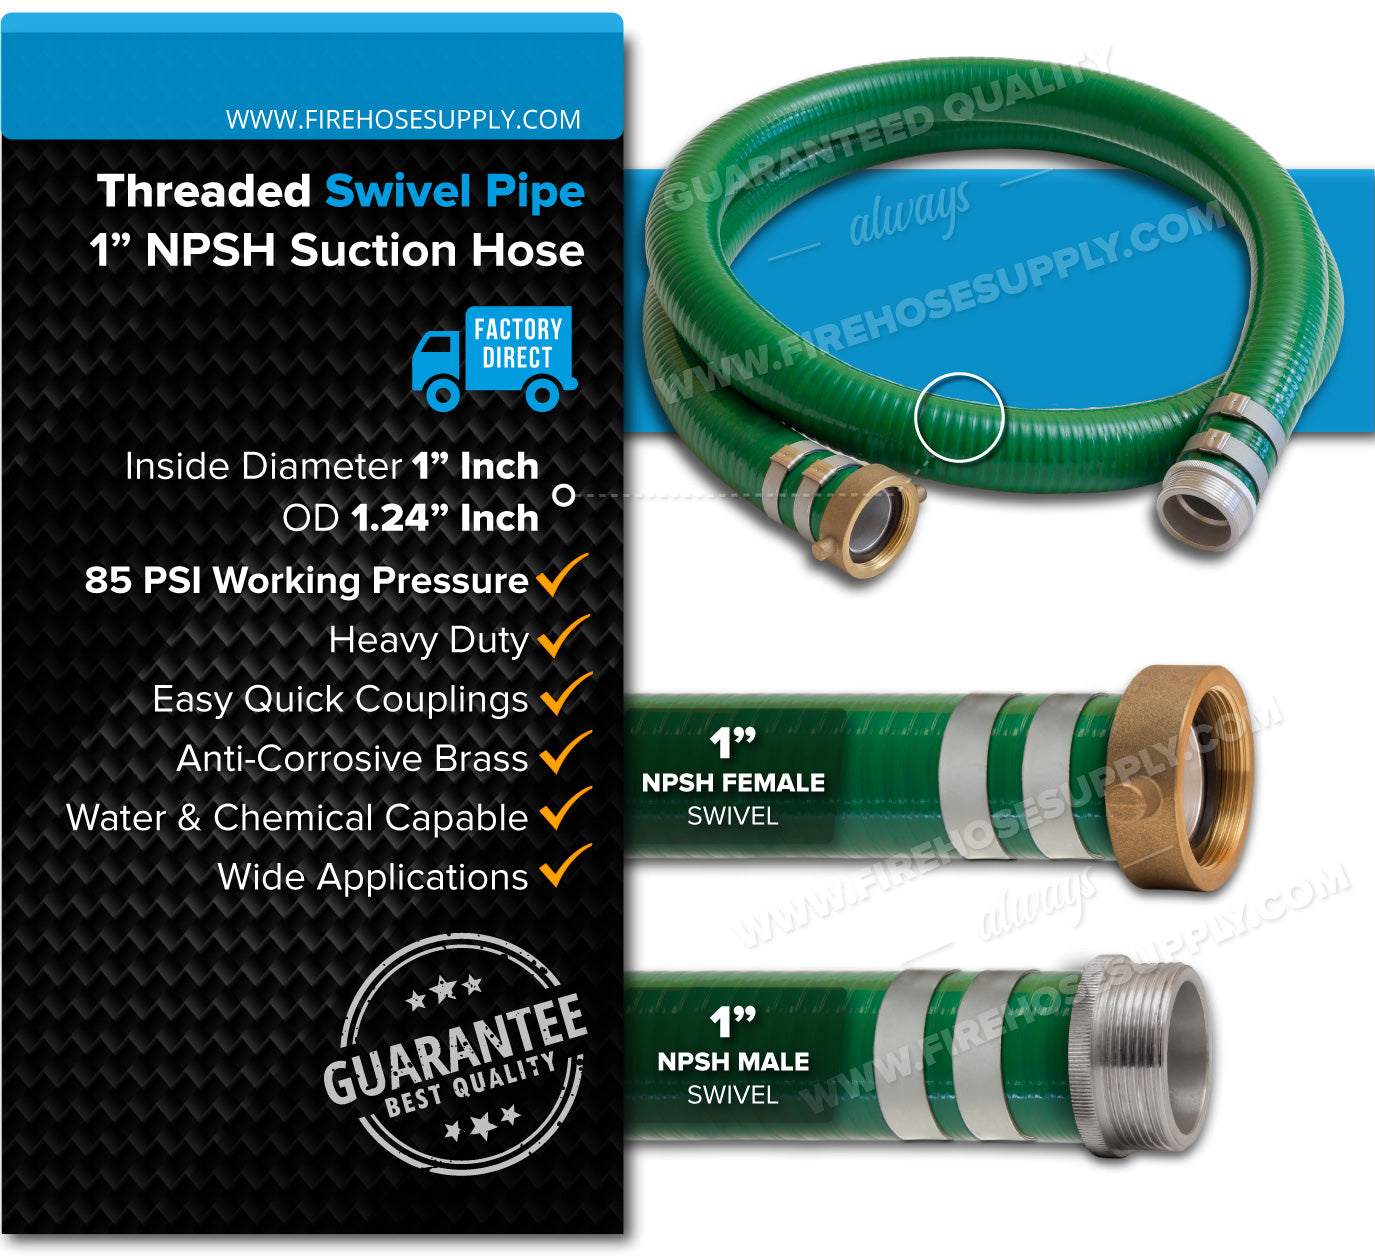 1 Inch Threaded Female x Male Green Suction Hose Overview